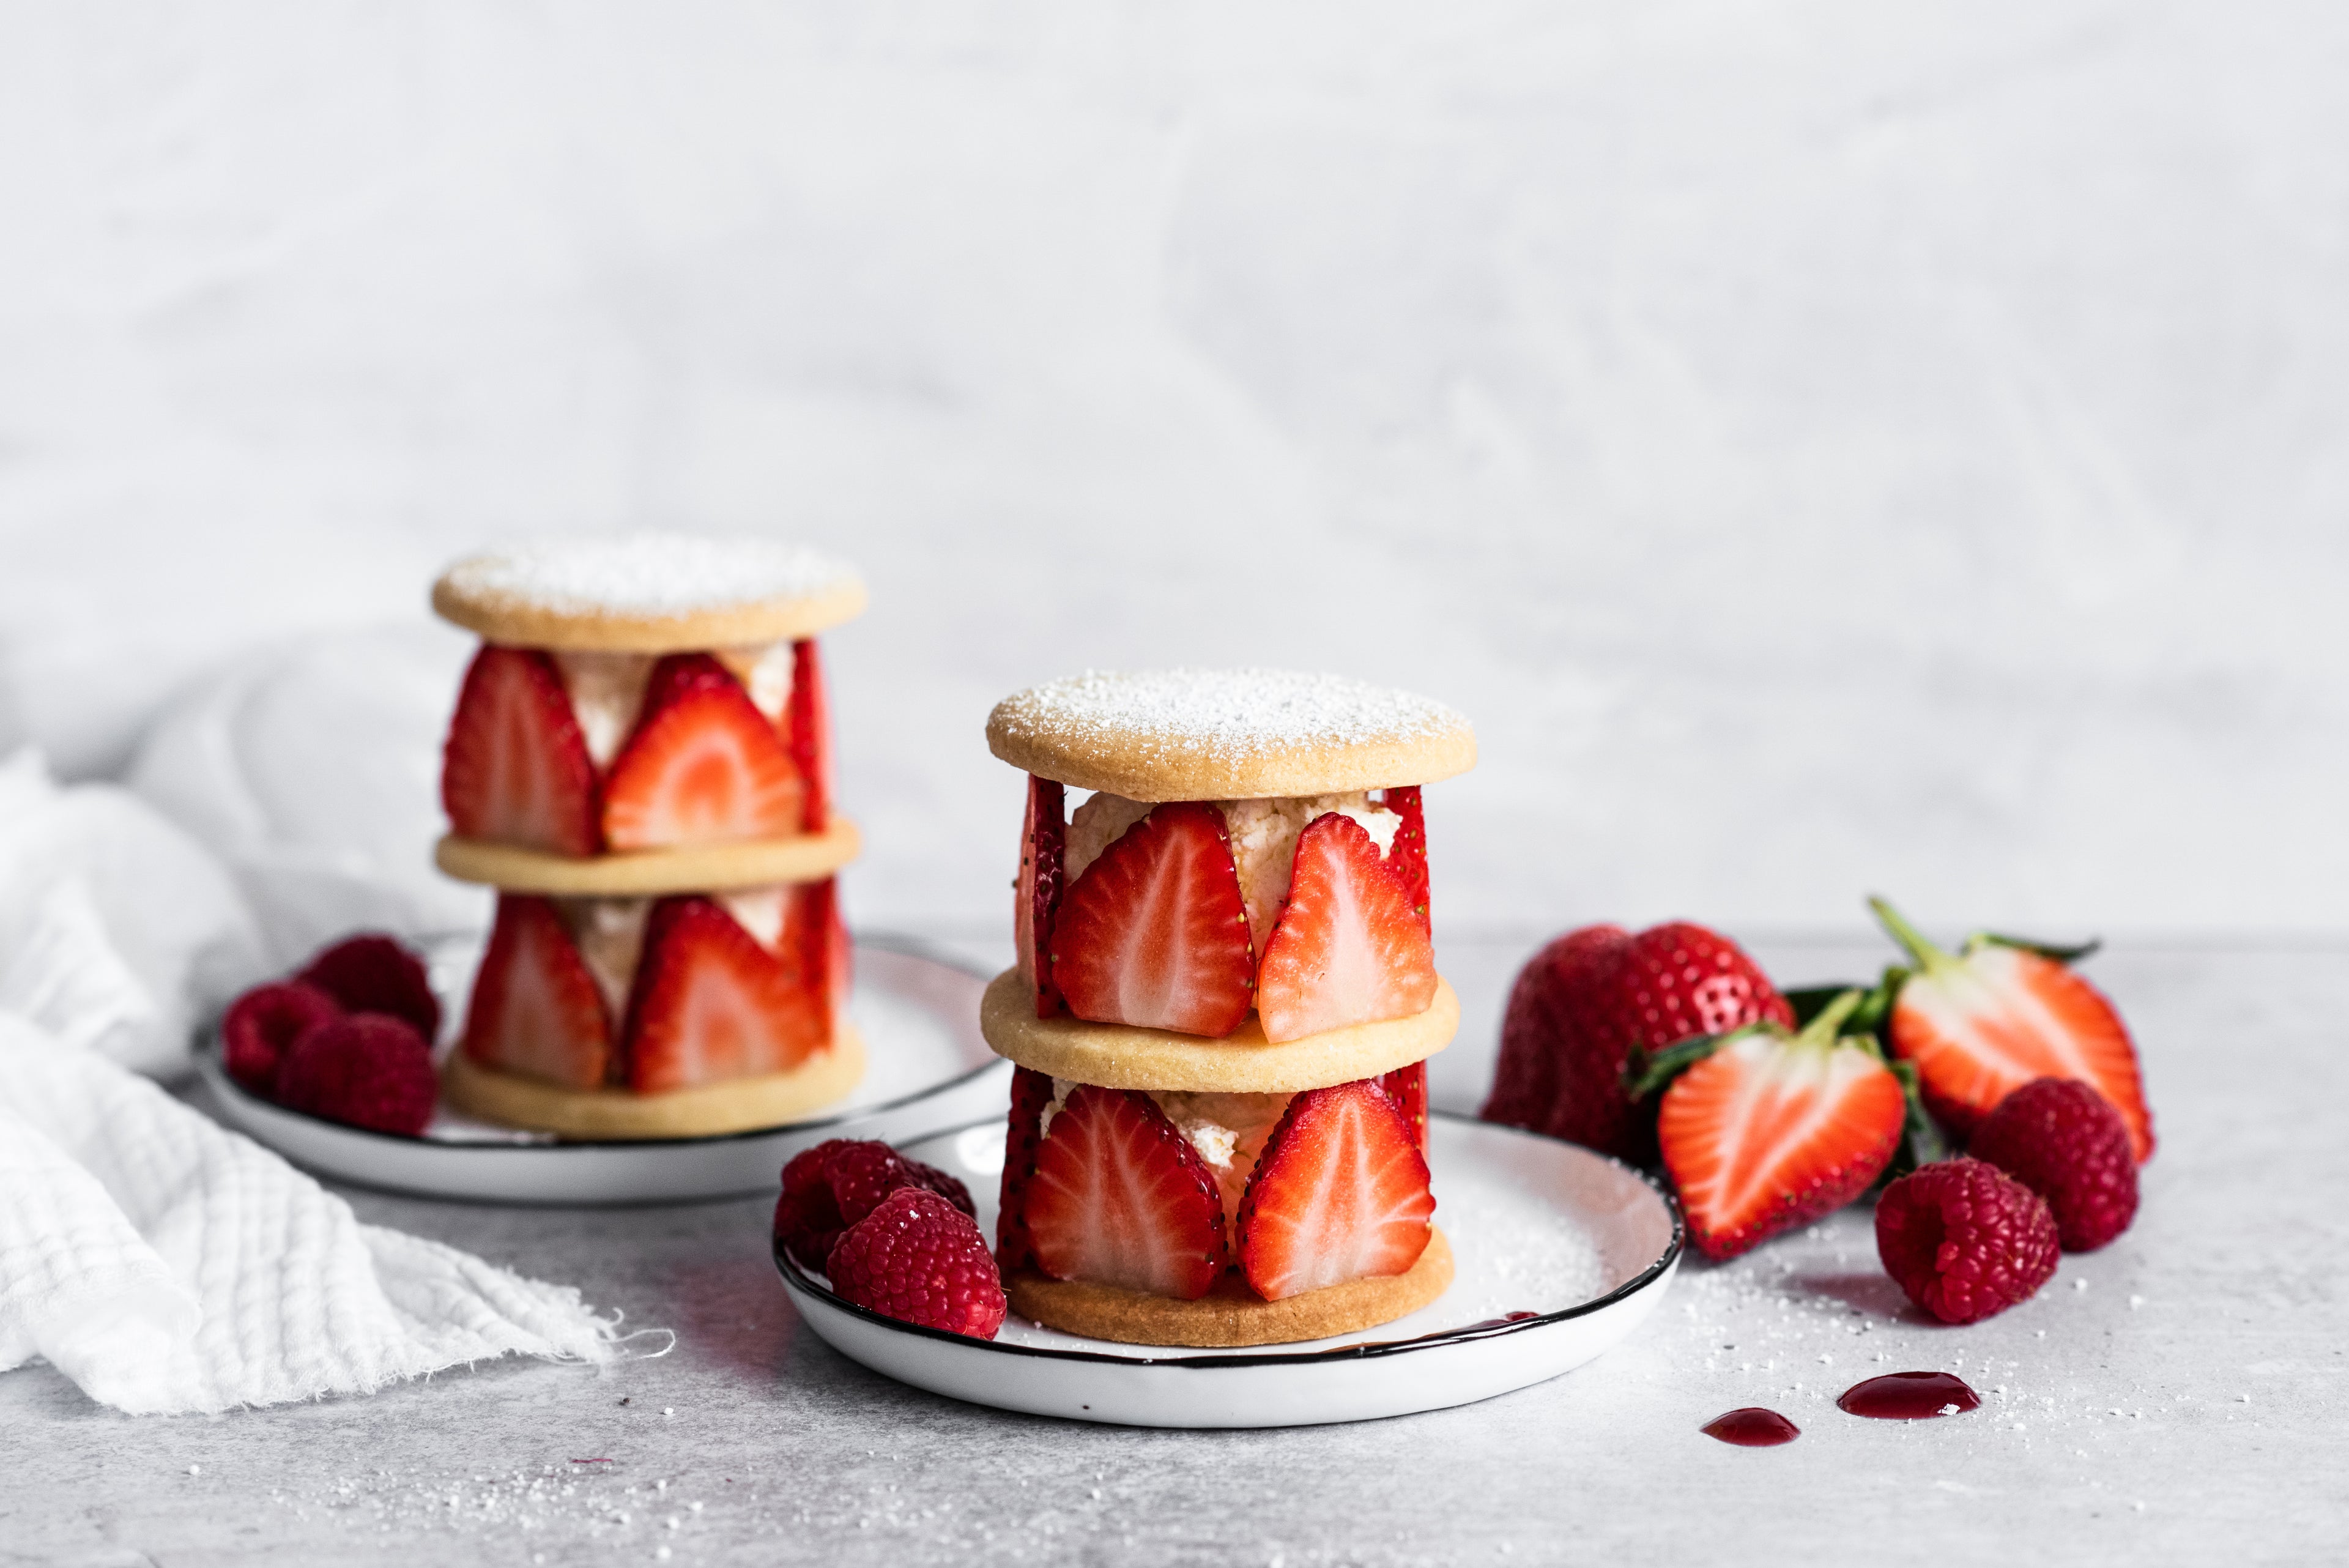 Shortbread rounds with sliced strawberries and cream sandwiched between